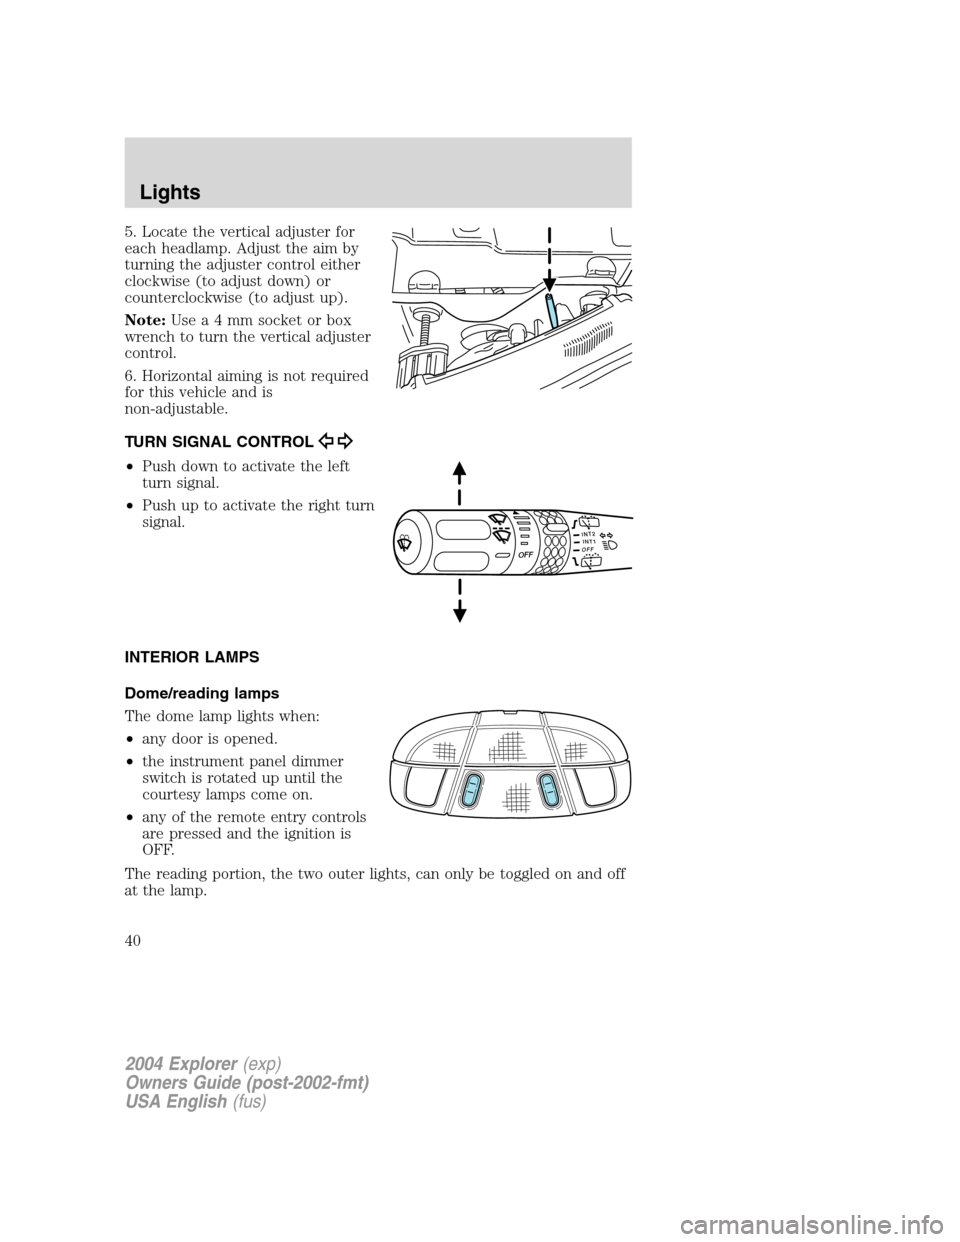 FORD EXPLORER 2004 3.G Owners Manual 5. Locate the vertical adjuster for
each headlamp. Adjust the aim by
turning the adjuster control either
clockwise (to adjust down) or
counterclockwise (to adjust up).
Note:Usea4mmsocket or box
wrench